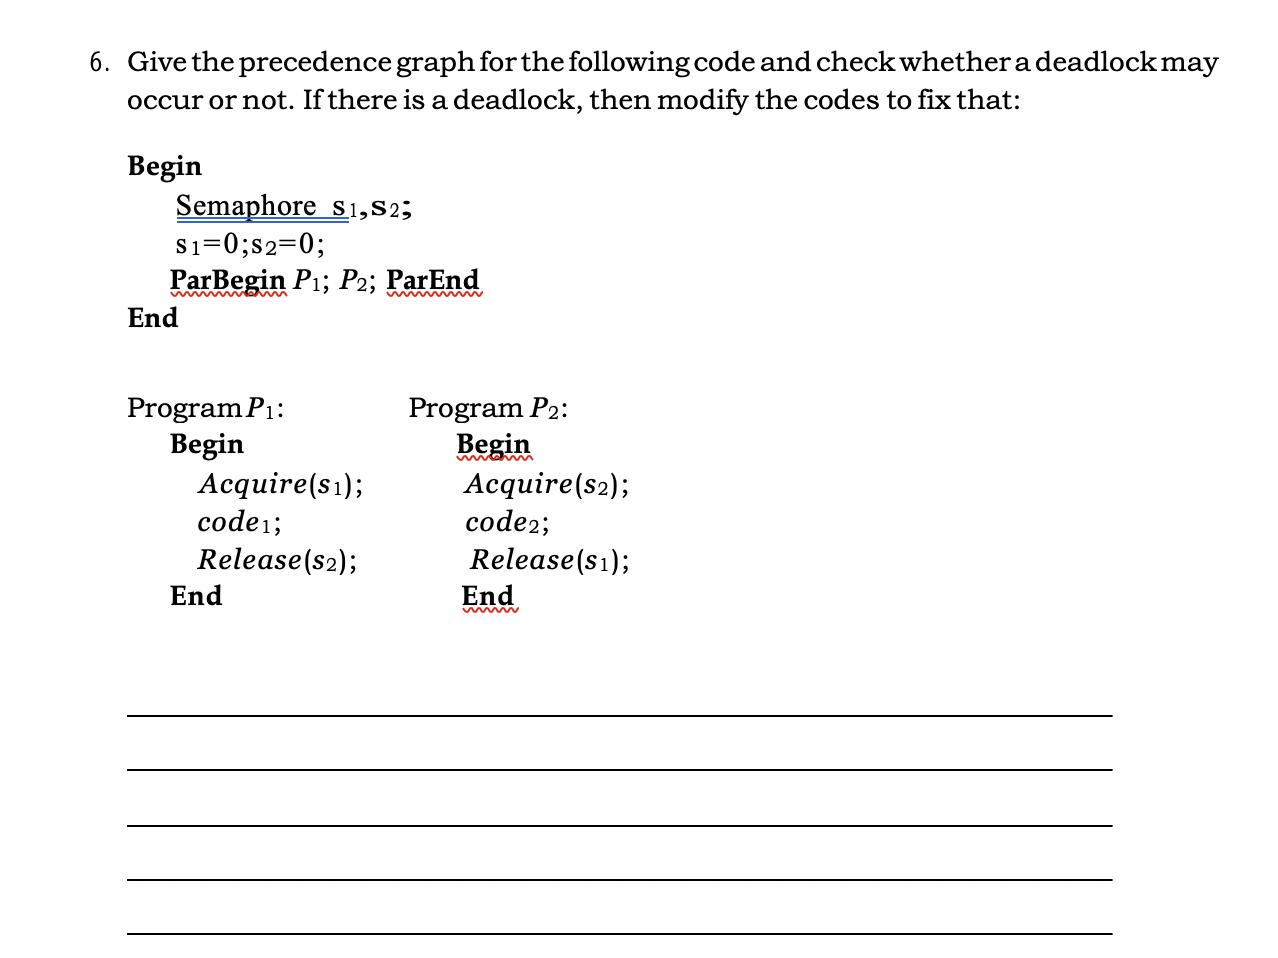 6. Give the precedence graph for the following code and check whether a deadlock may occur or not. If there